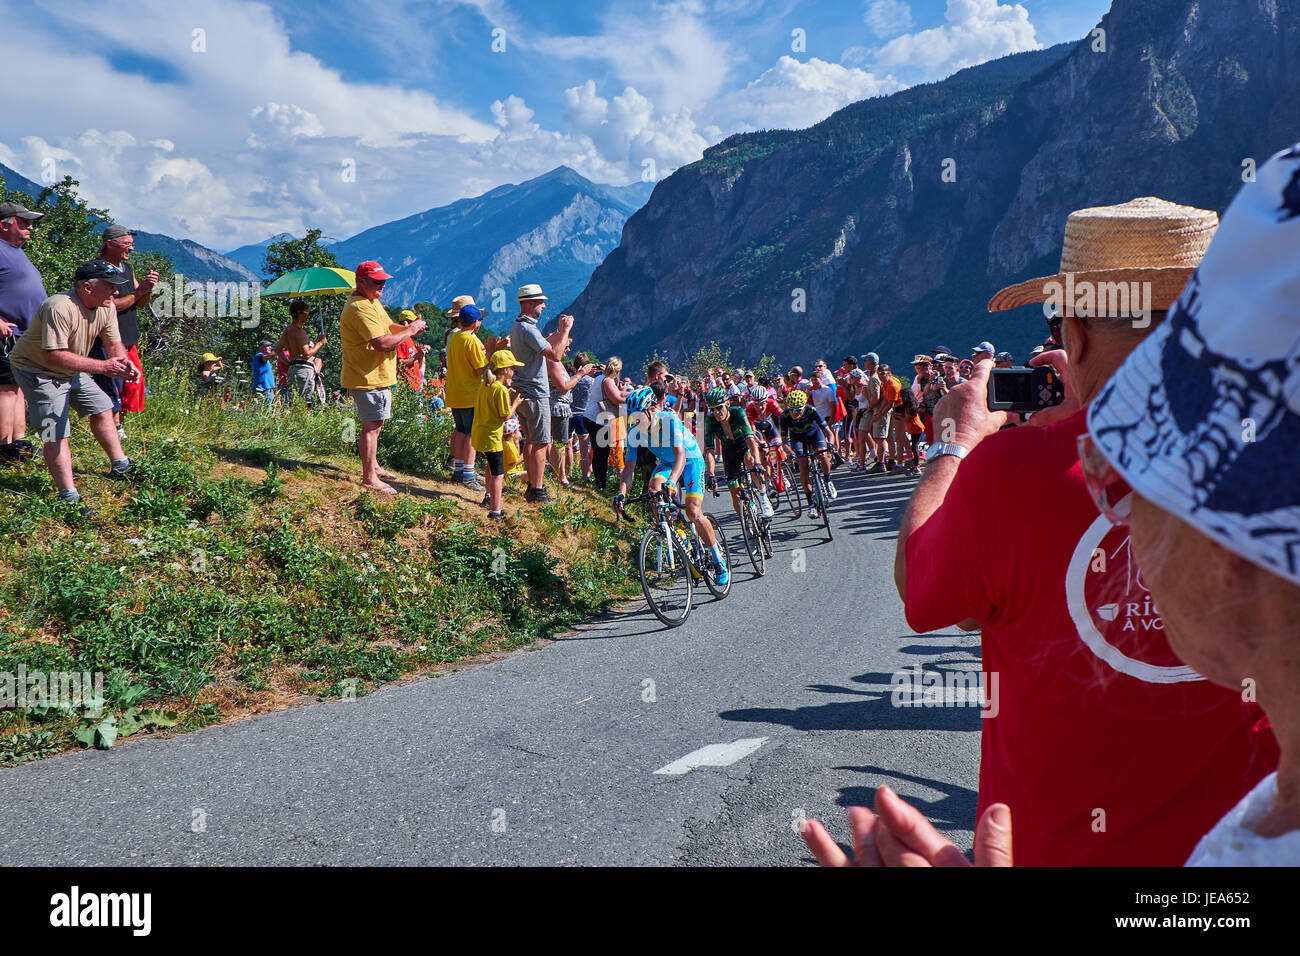 MONTVERNIER, FRANCE - JULY 23, 2015: Danish rider Jakob Fuglsang leading a small group of riders through a hairpin turn on the mountain roads leading  Stock Photo